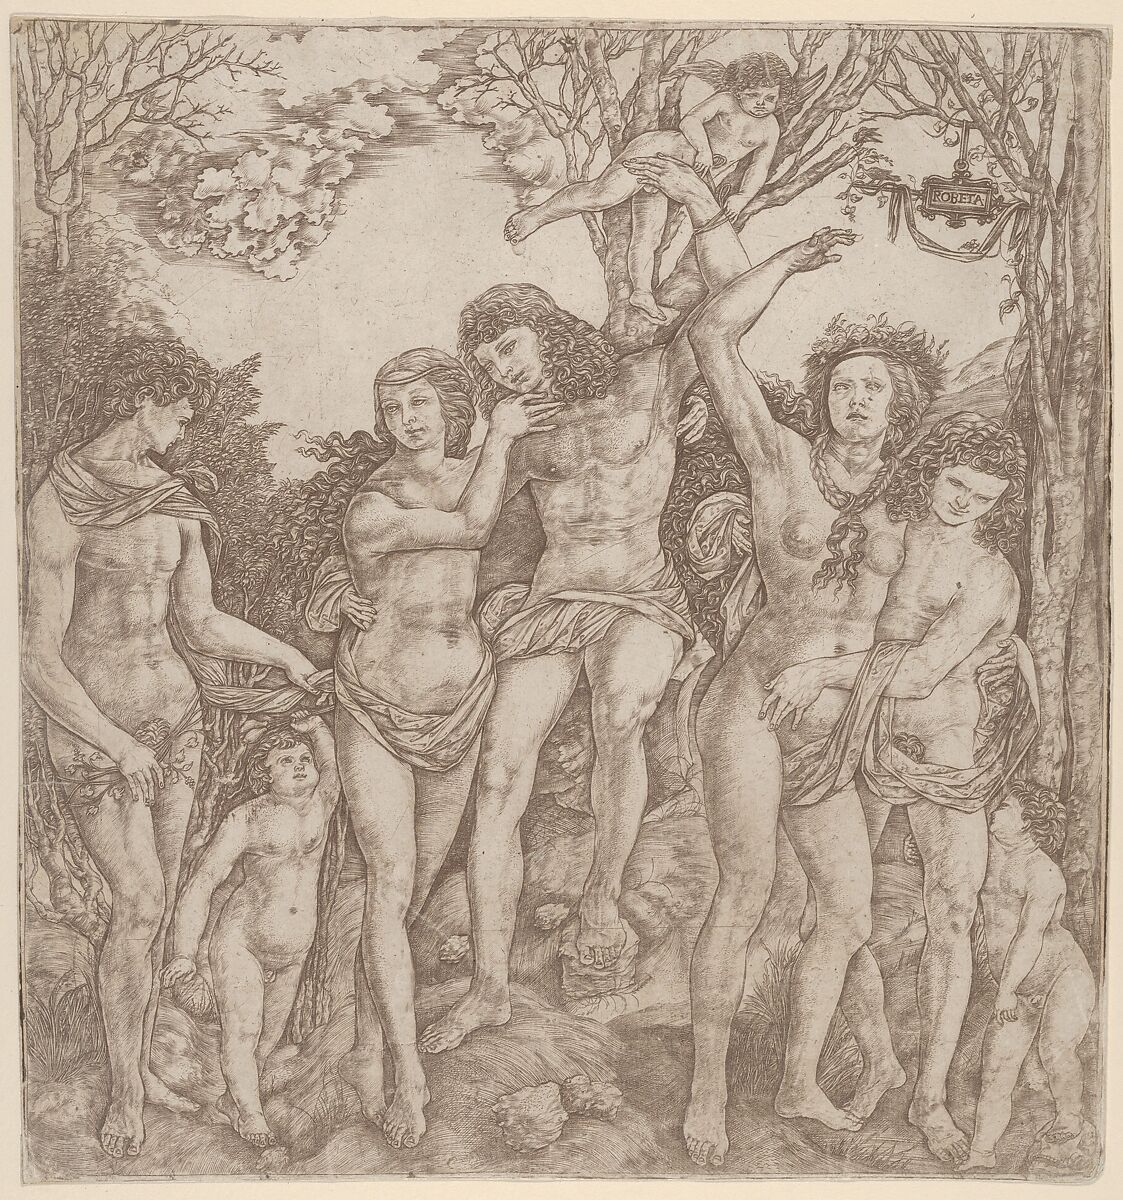 Allegory of the Power of Love, with a man at center embracing a semi-naked woman, who is bound to a tree by Cupid, Cristofano di Michele Martini (Il Robetta) (Italian, Florence 1462–after 1535 Florence), Engraving in brown ink 